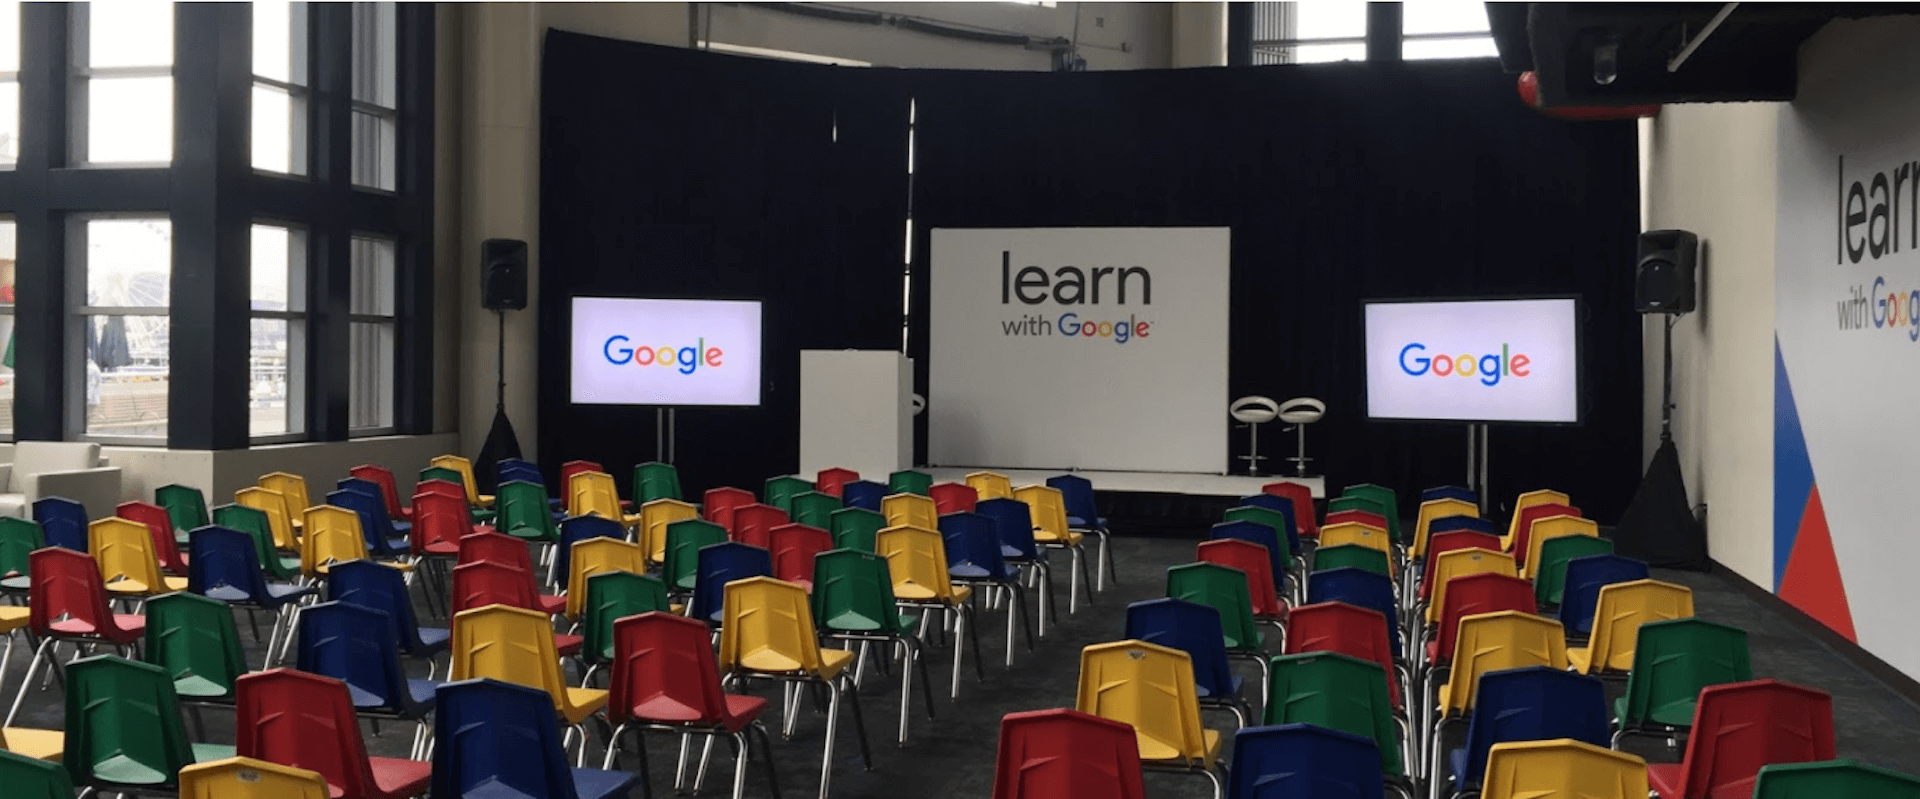 smx-advanced-learn-with-google-classroom-1920